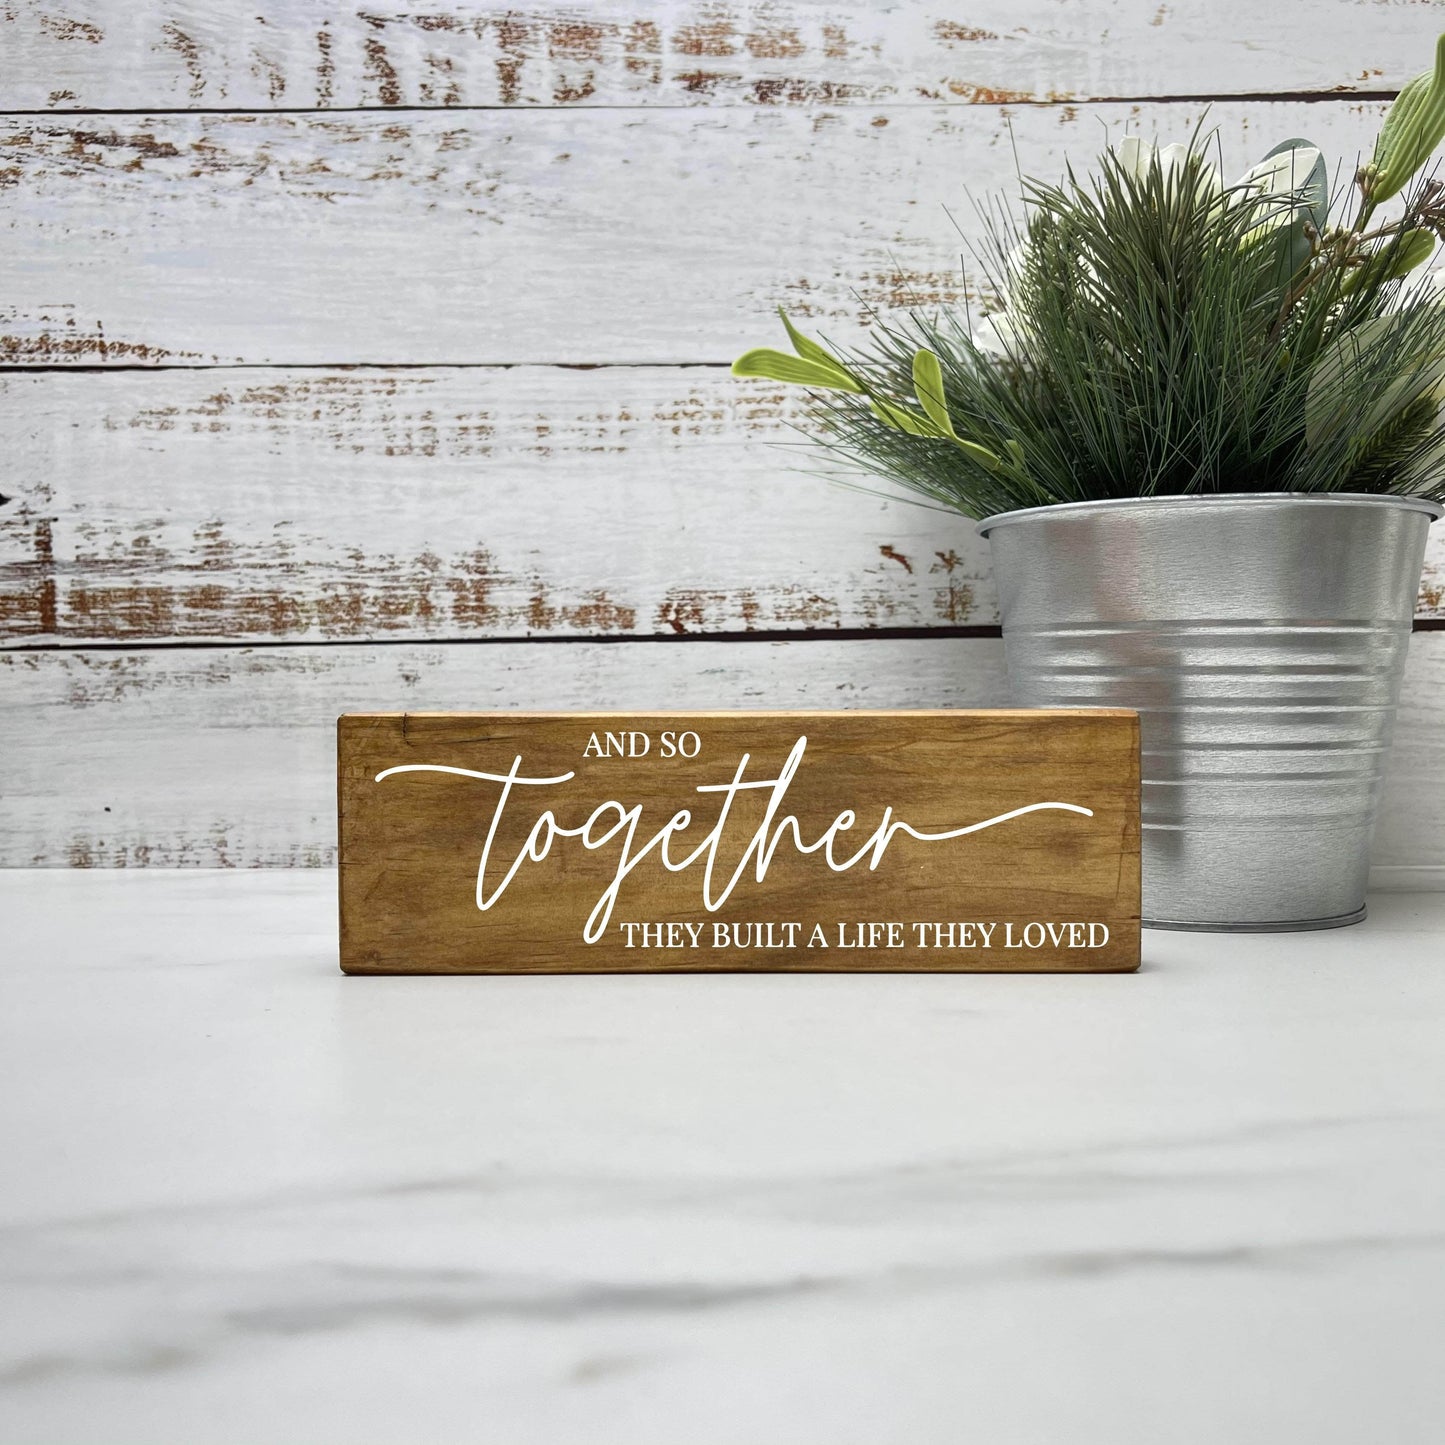 And so together they built a life they loved wood sign, farmhouse sign, rustic decor, home decor